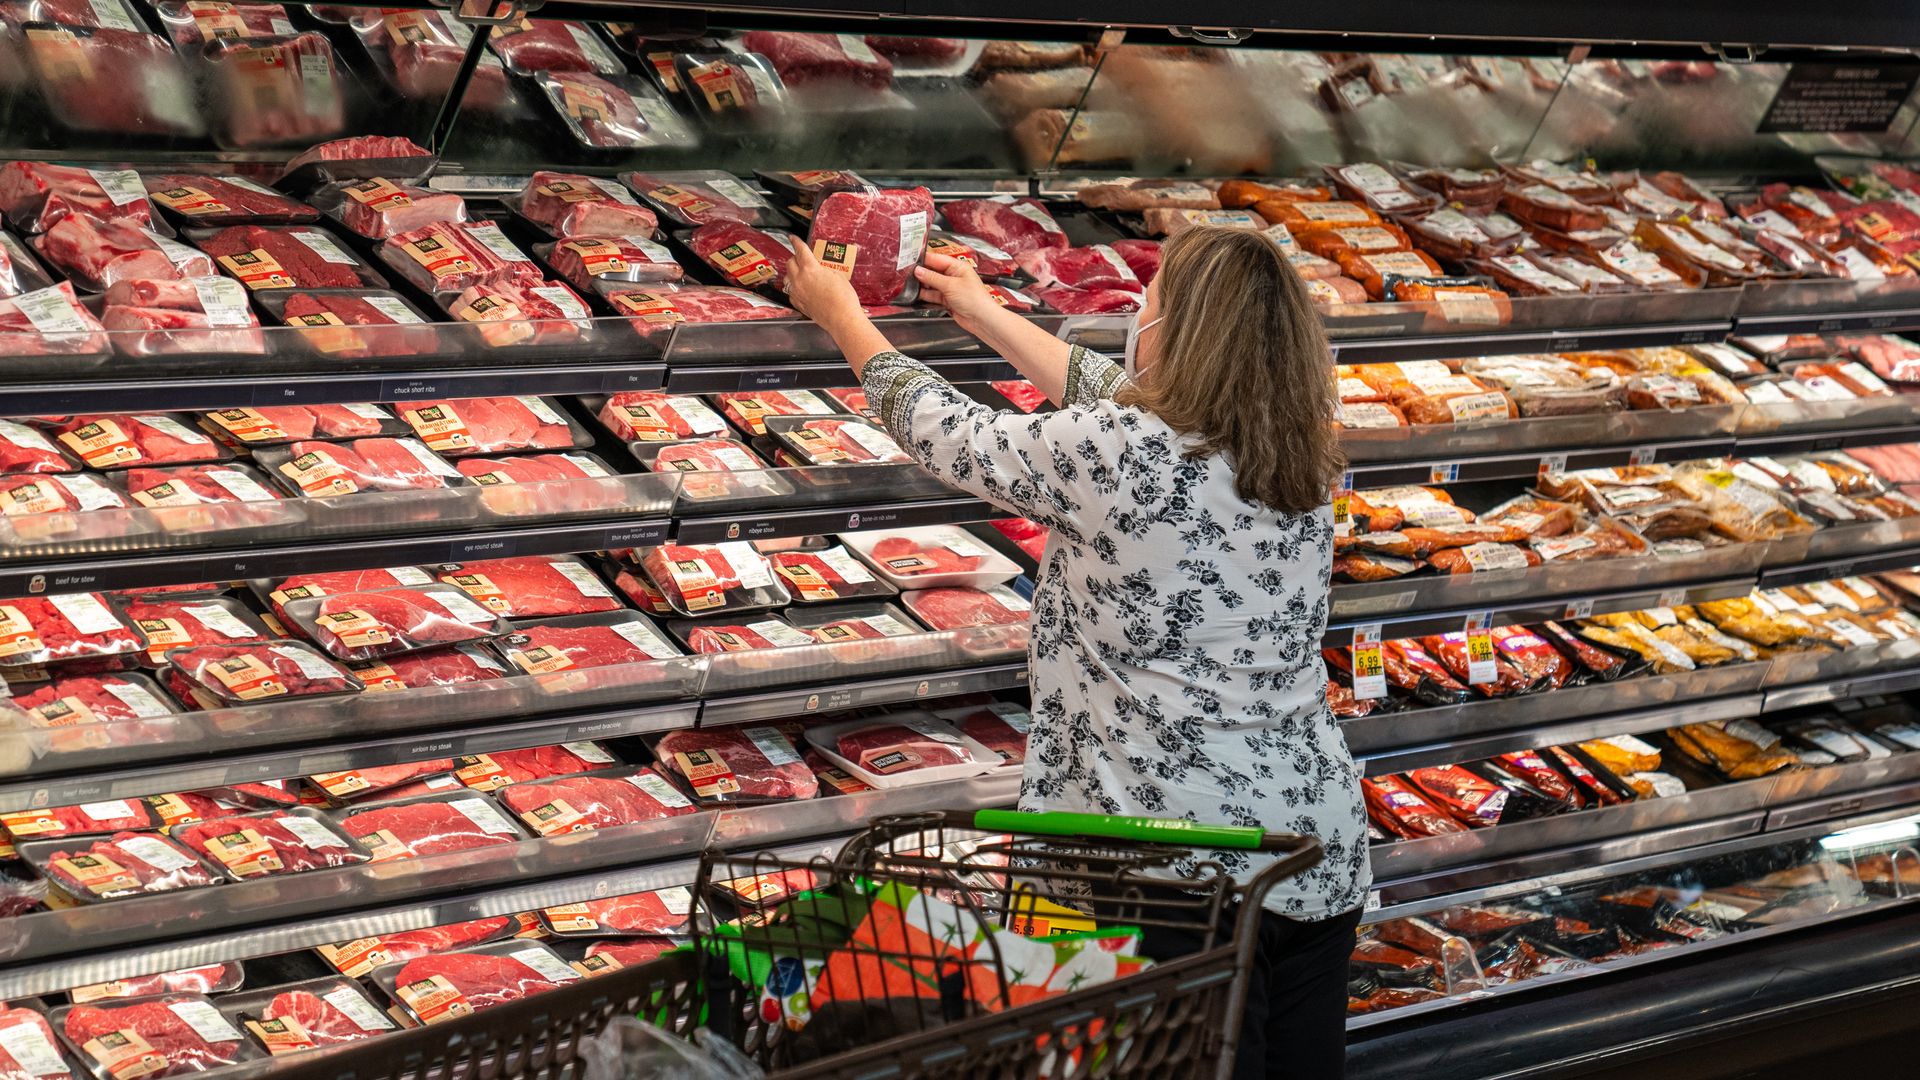 Shopper looks at meat at grocery store